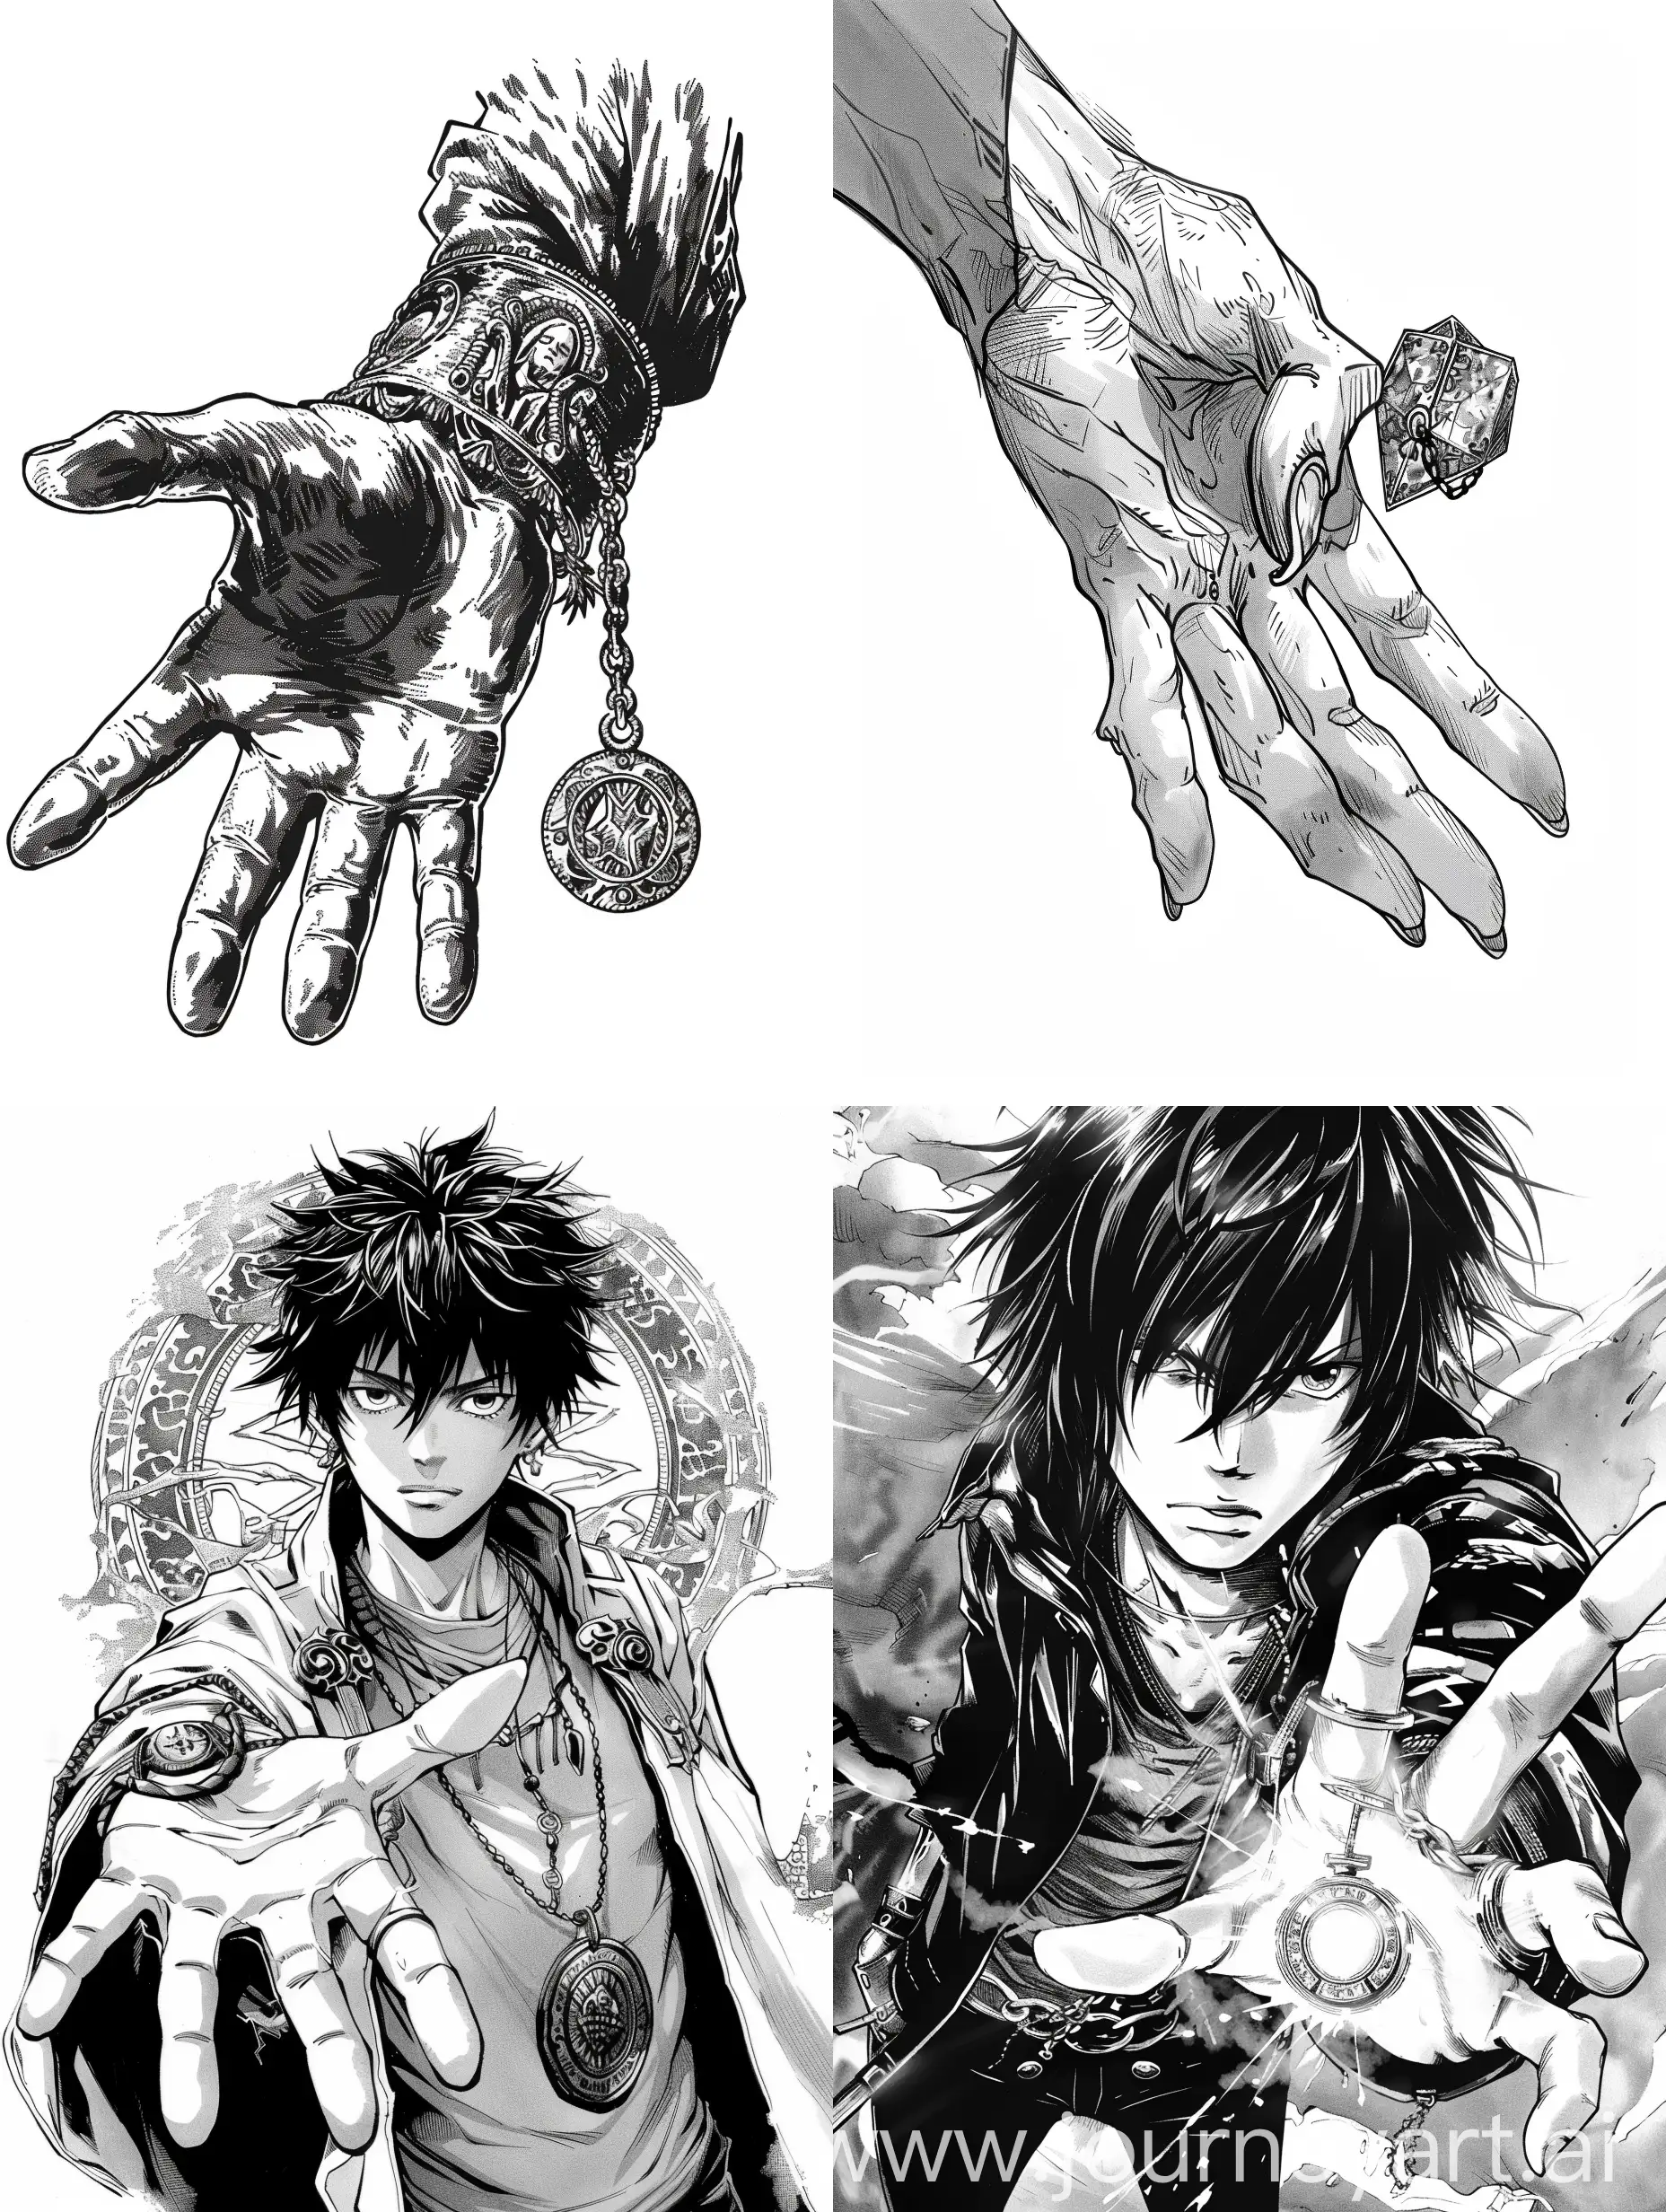 amulet in the left hand, manga style.